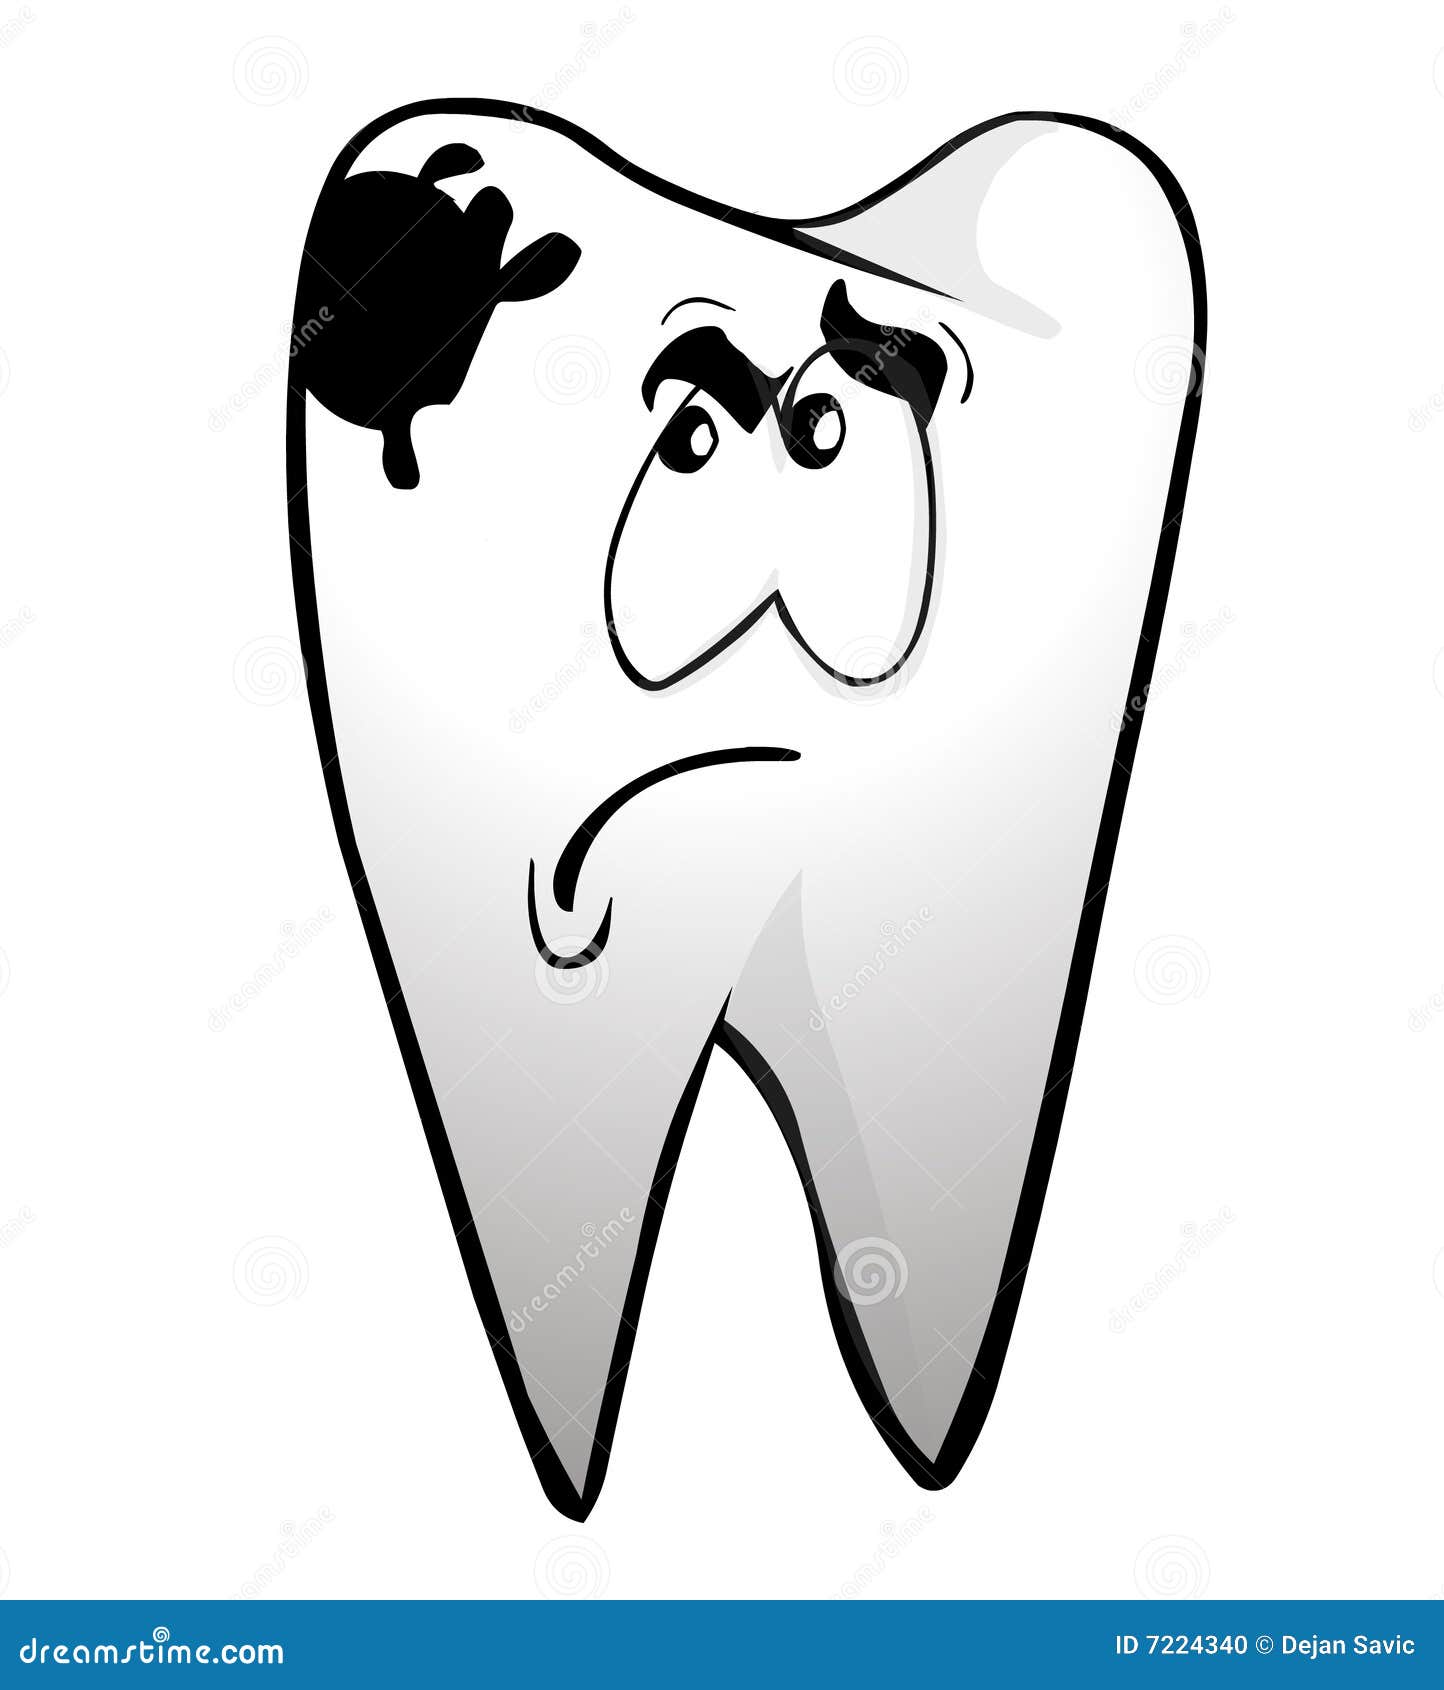 toothache clipart - photo #39